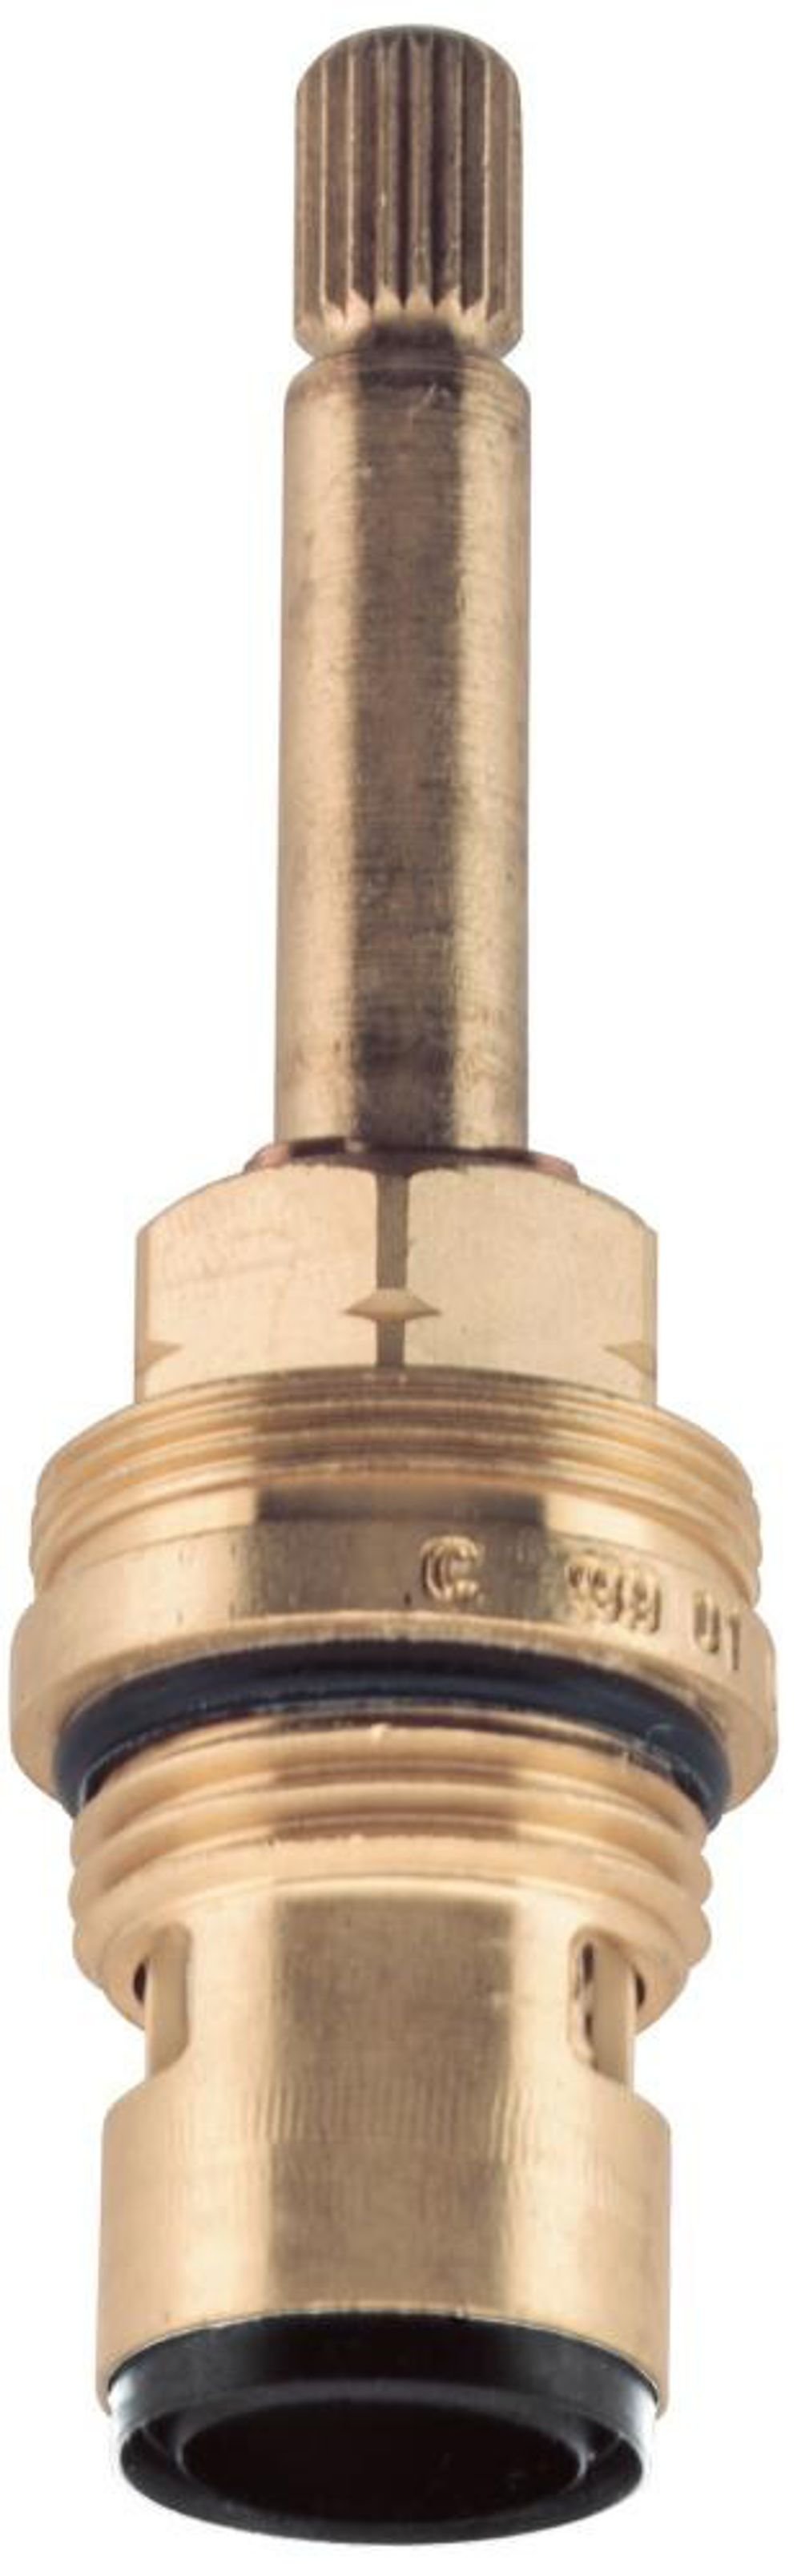 Grohe 45869 1/2" Ext Spindle Ceramic Valve